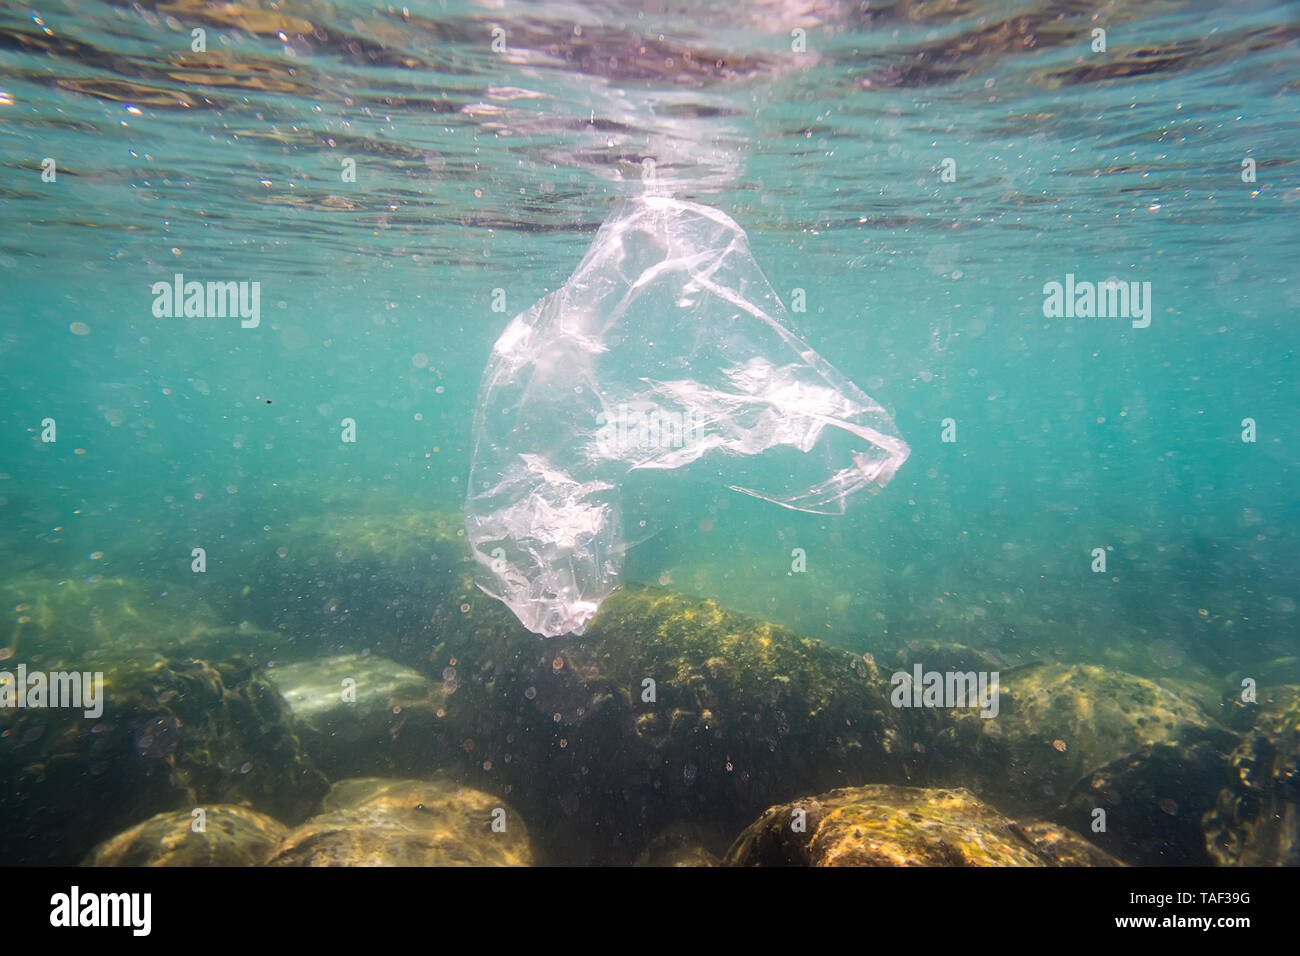 Plastic pollution: discarded plastic rubbish bag floats on tropical coral reef presenting a hazard to marine life Stock Photo